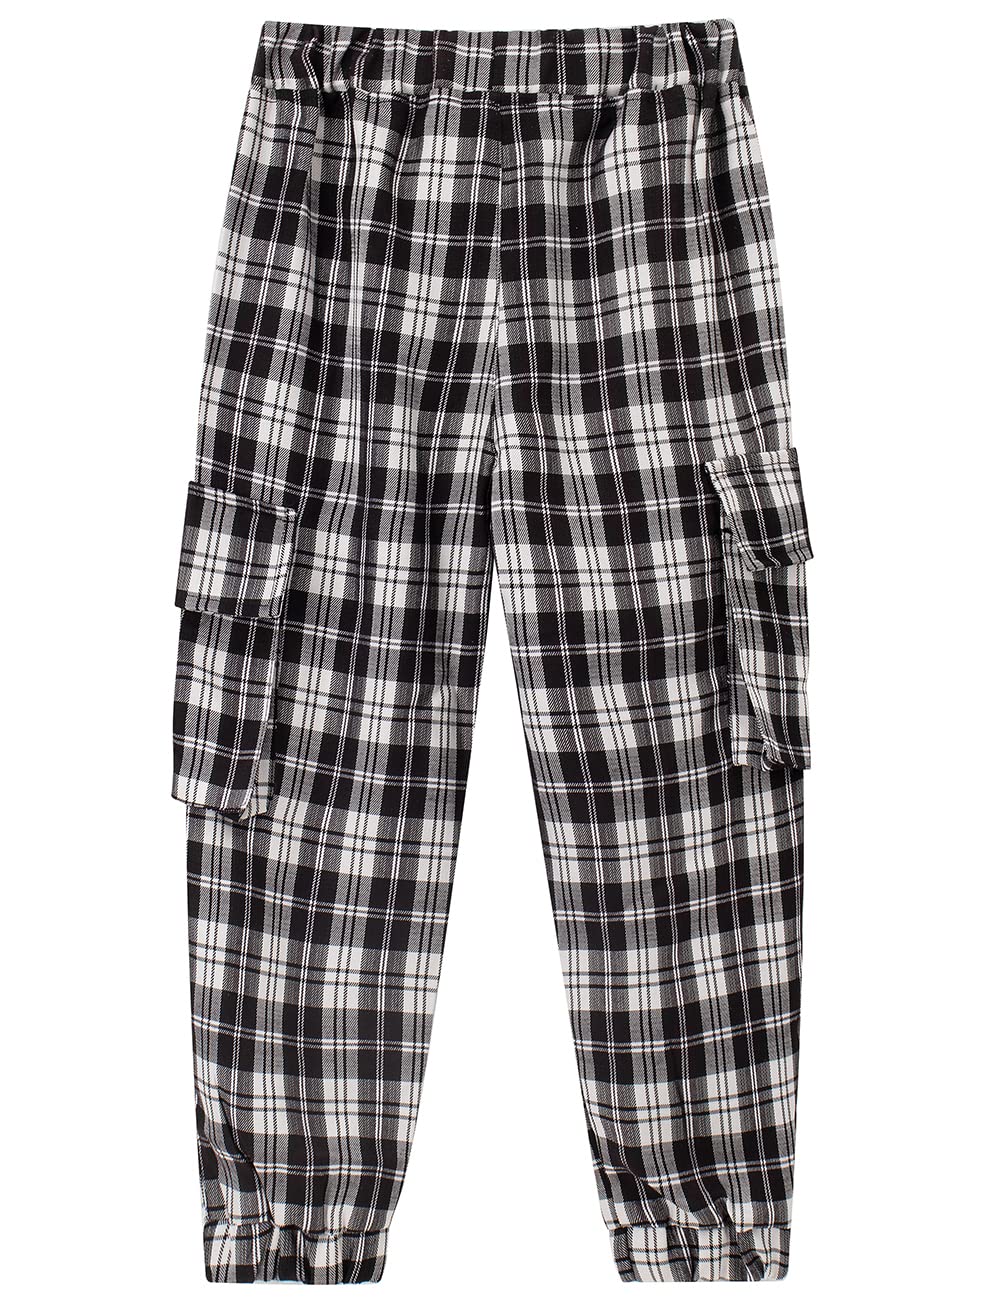 Spring&Gege Boys’ Cargo Joggers Elastic Waist Pull on Plaid Pants with Pockets (3-14 Years)